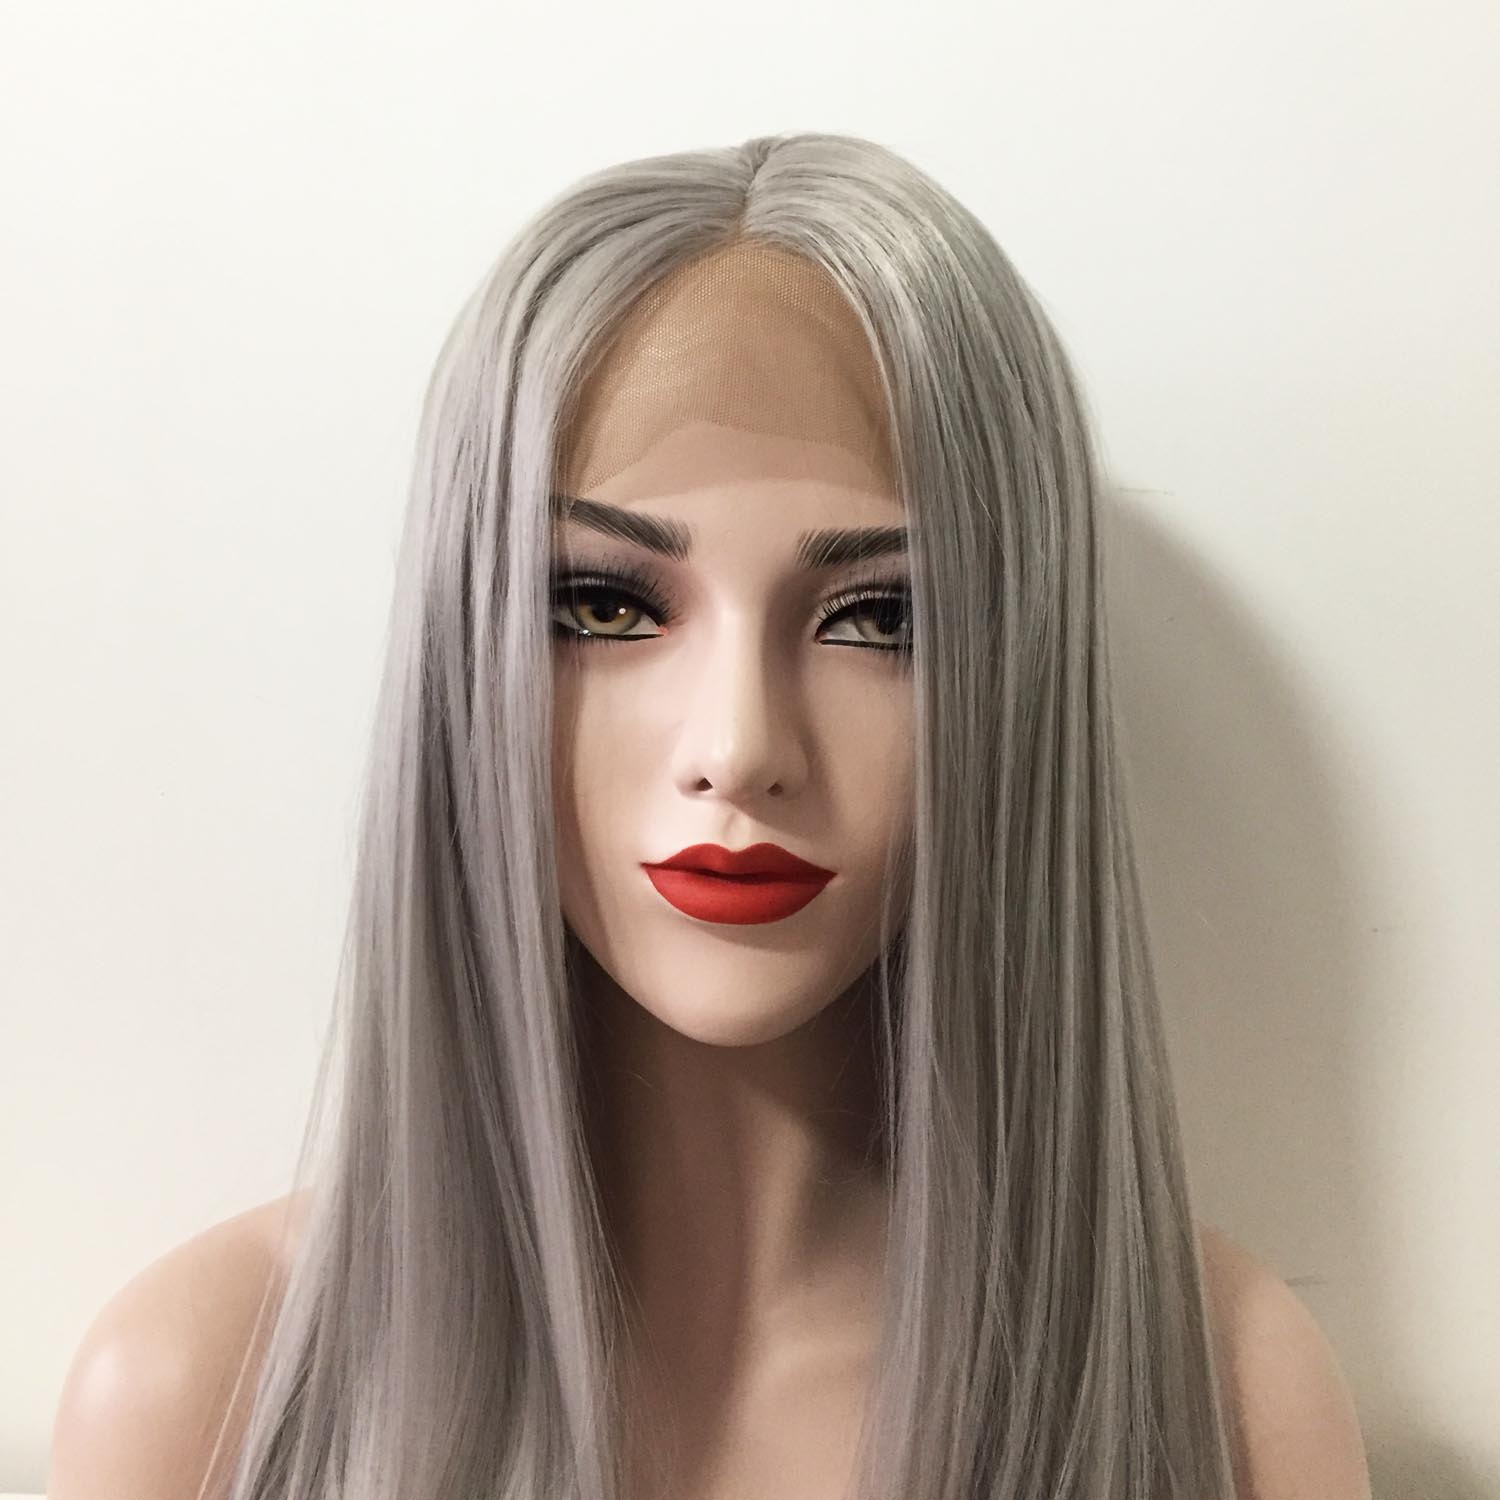 nevermindyrhead Women Grey Lace Front Middle Part Long Straight Choppy End Wig 20inches